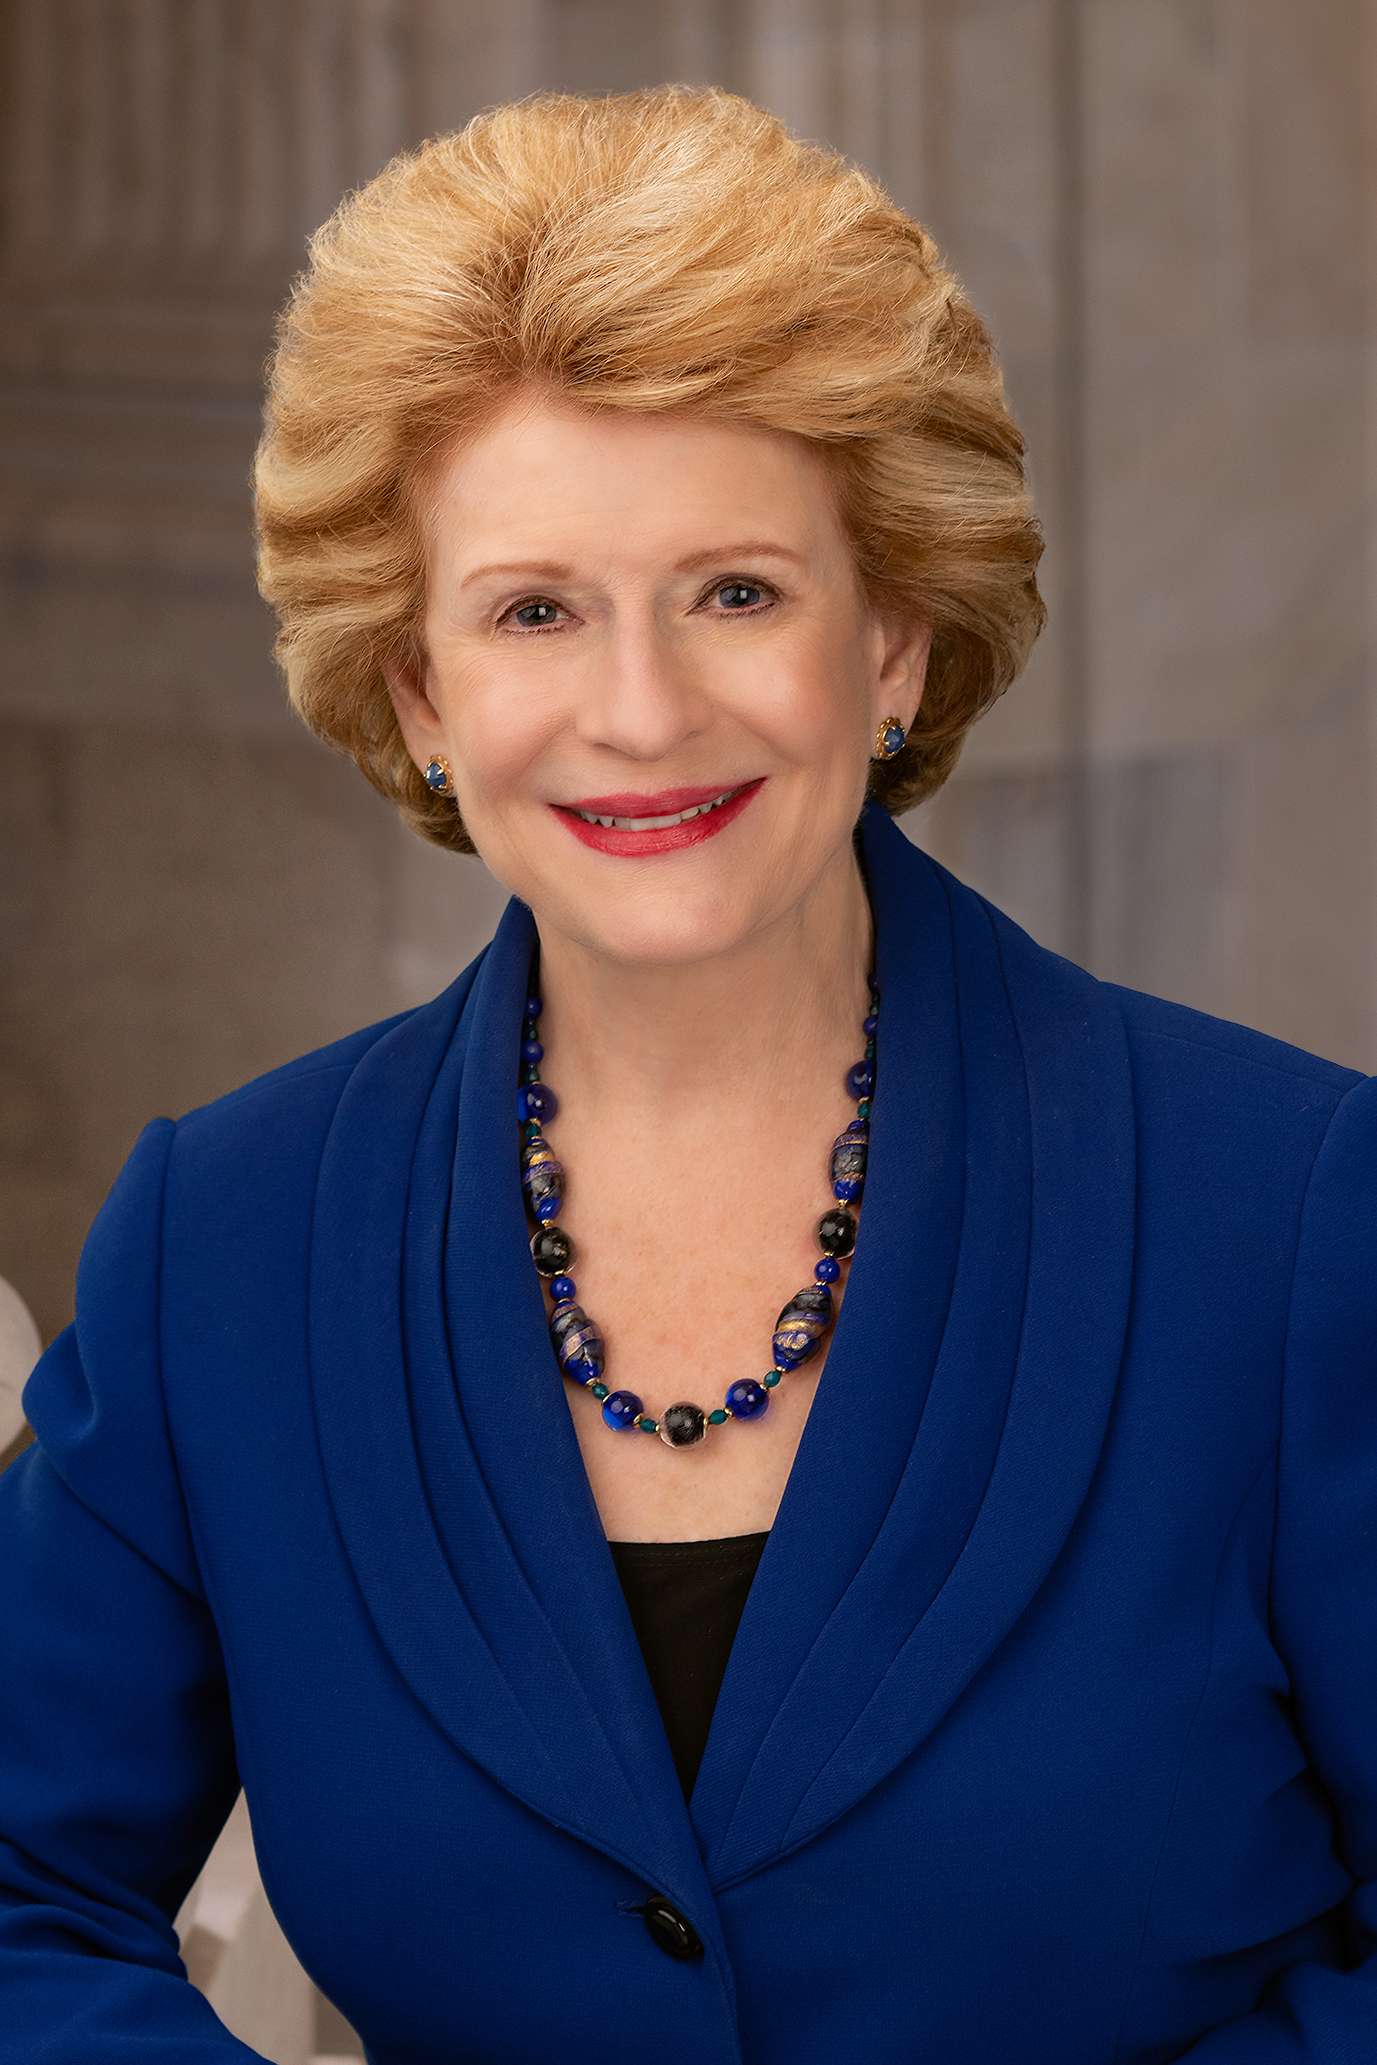 U.S. Sen. Debbie Stabenow, MSU College of Social Science alumna, receives the Bryce Harlow Award for public service with integrity